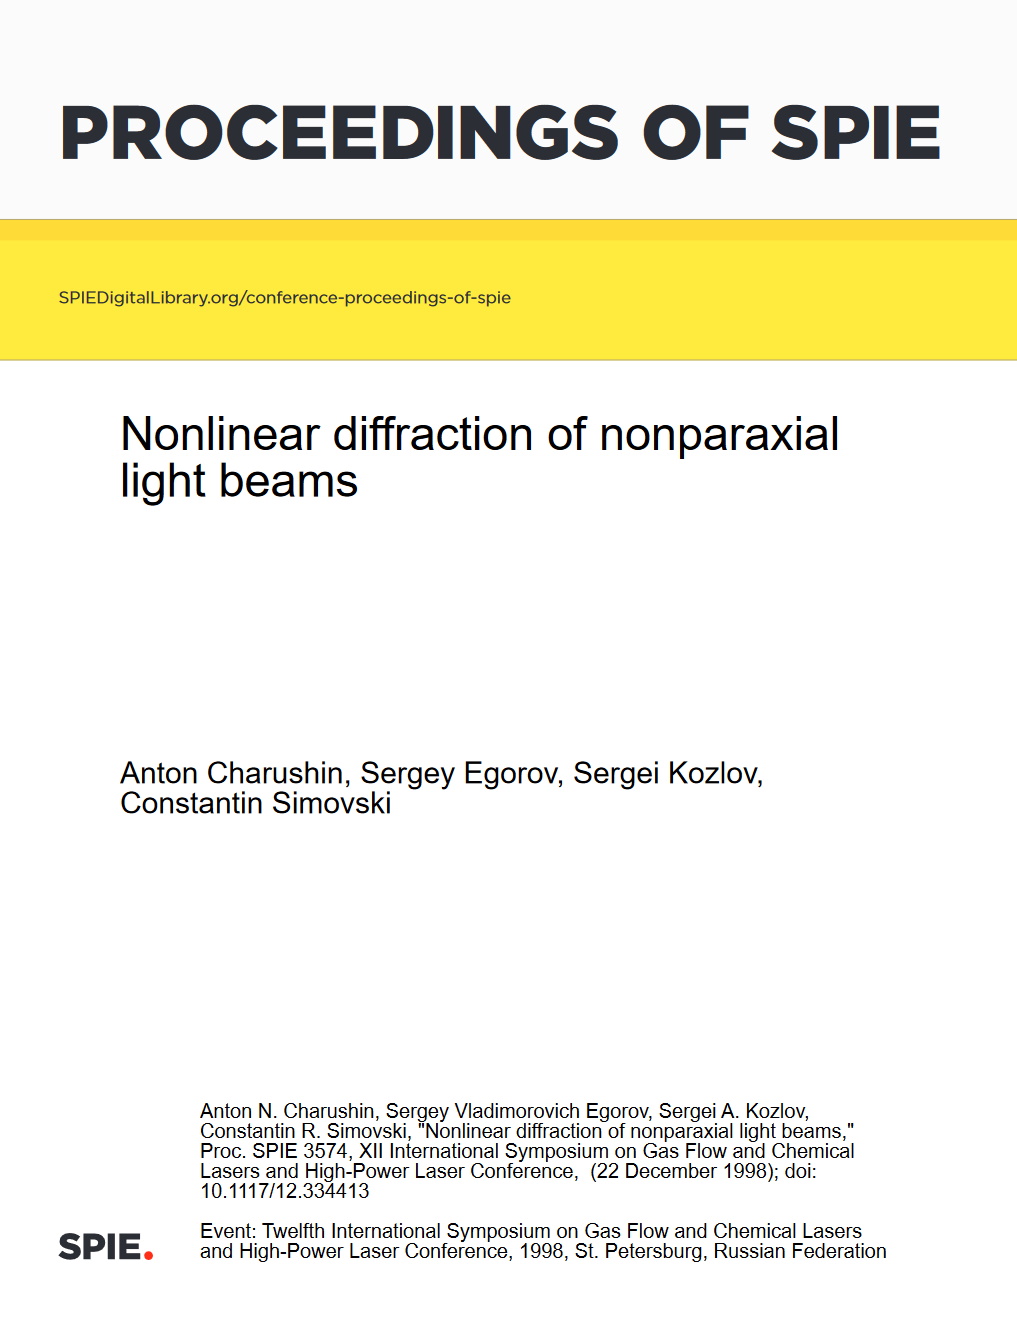 Nonlinear diffraction of nonparaxial light beams in media with saturated nonlinearity